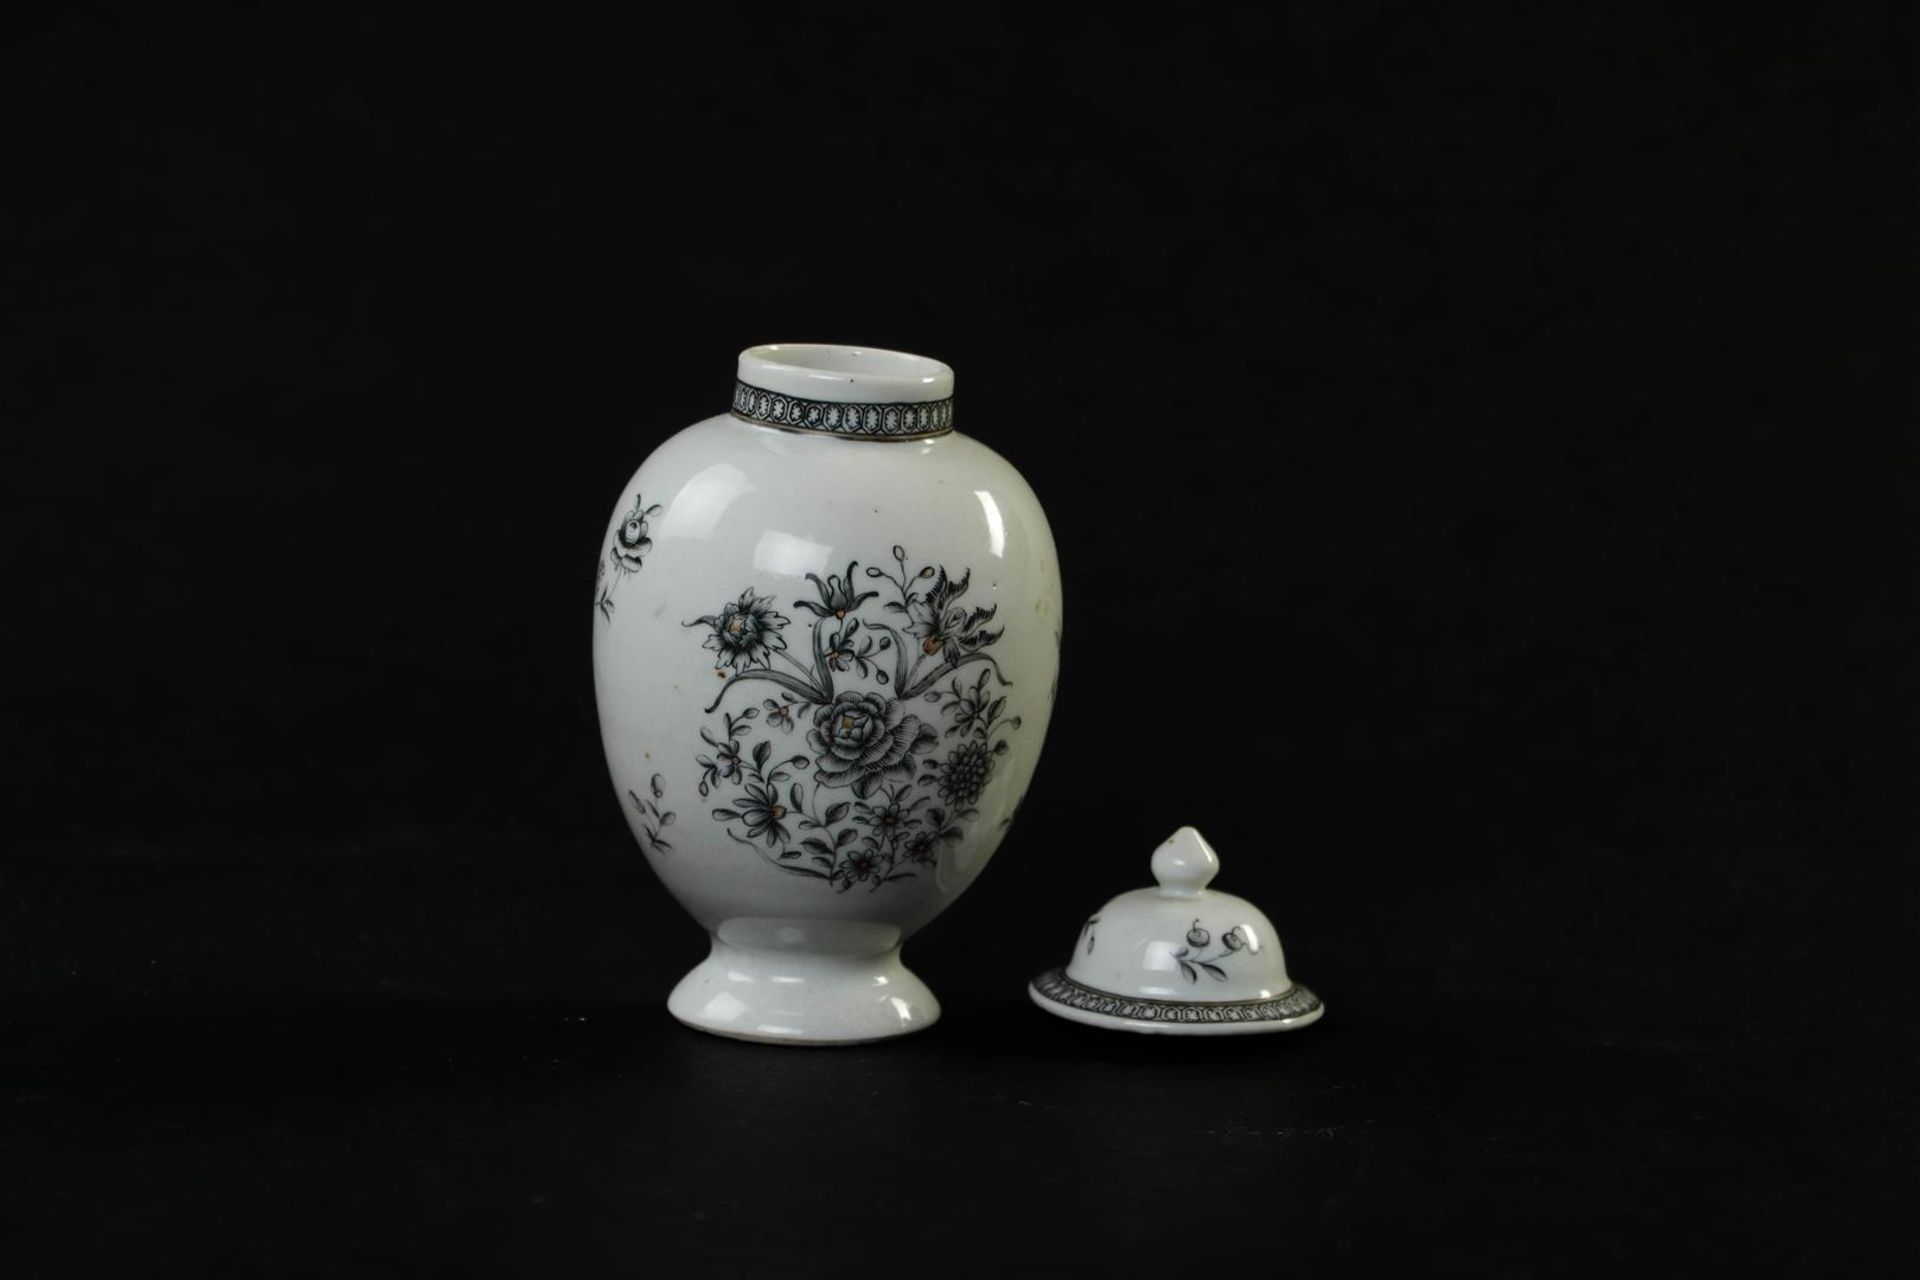 An Encre de Chine tableware set consisting of a teapot, milk jug, tea caddy, patty pan and spoon tra - Image 21 of 24